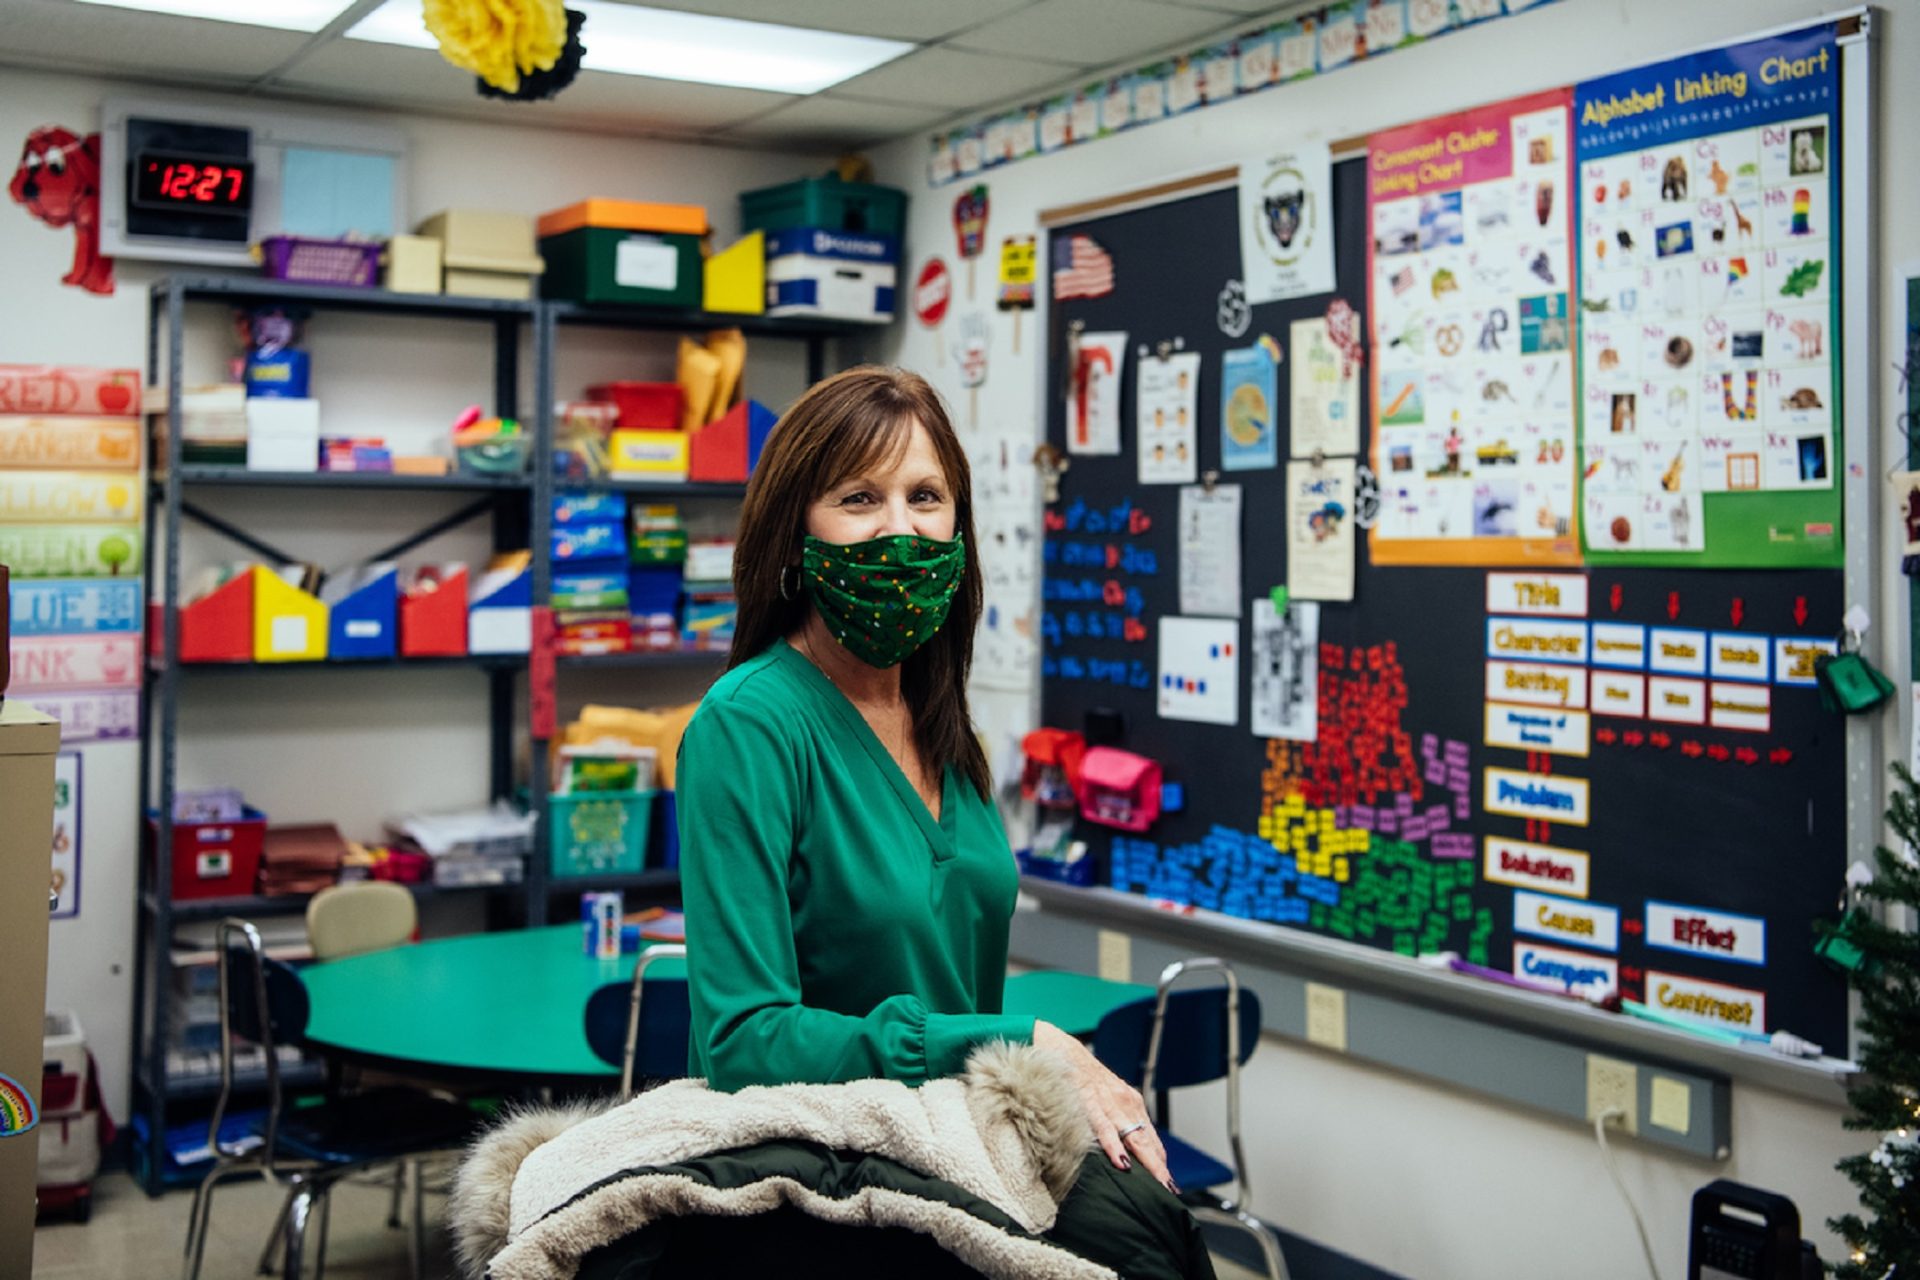 Maria Szczecina stands behind the desk chair in her classroom adorned with brightly colored educational tools. She is one of two Title 1 Reading teachers at the school. She used the word ”triage” to describe coping with inadequate funding and the state of the facility.